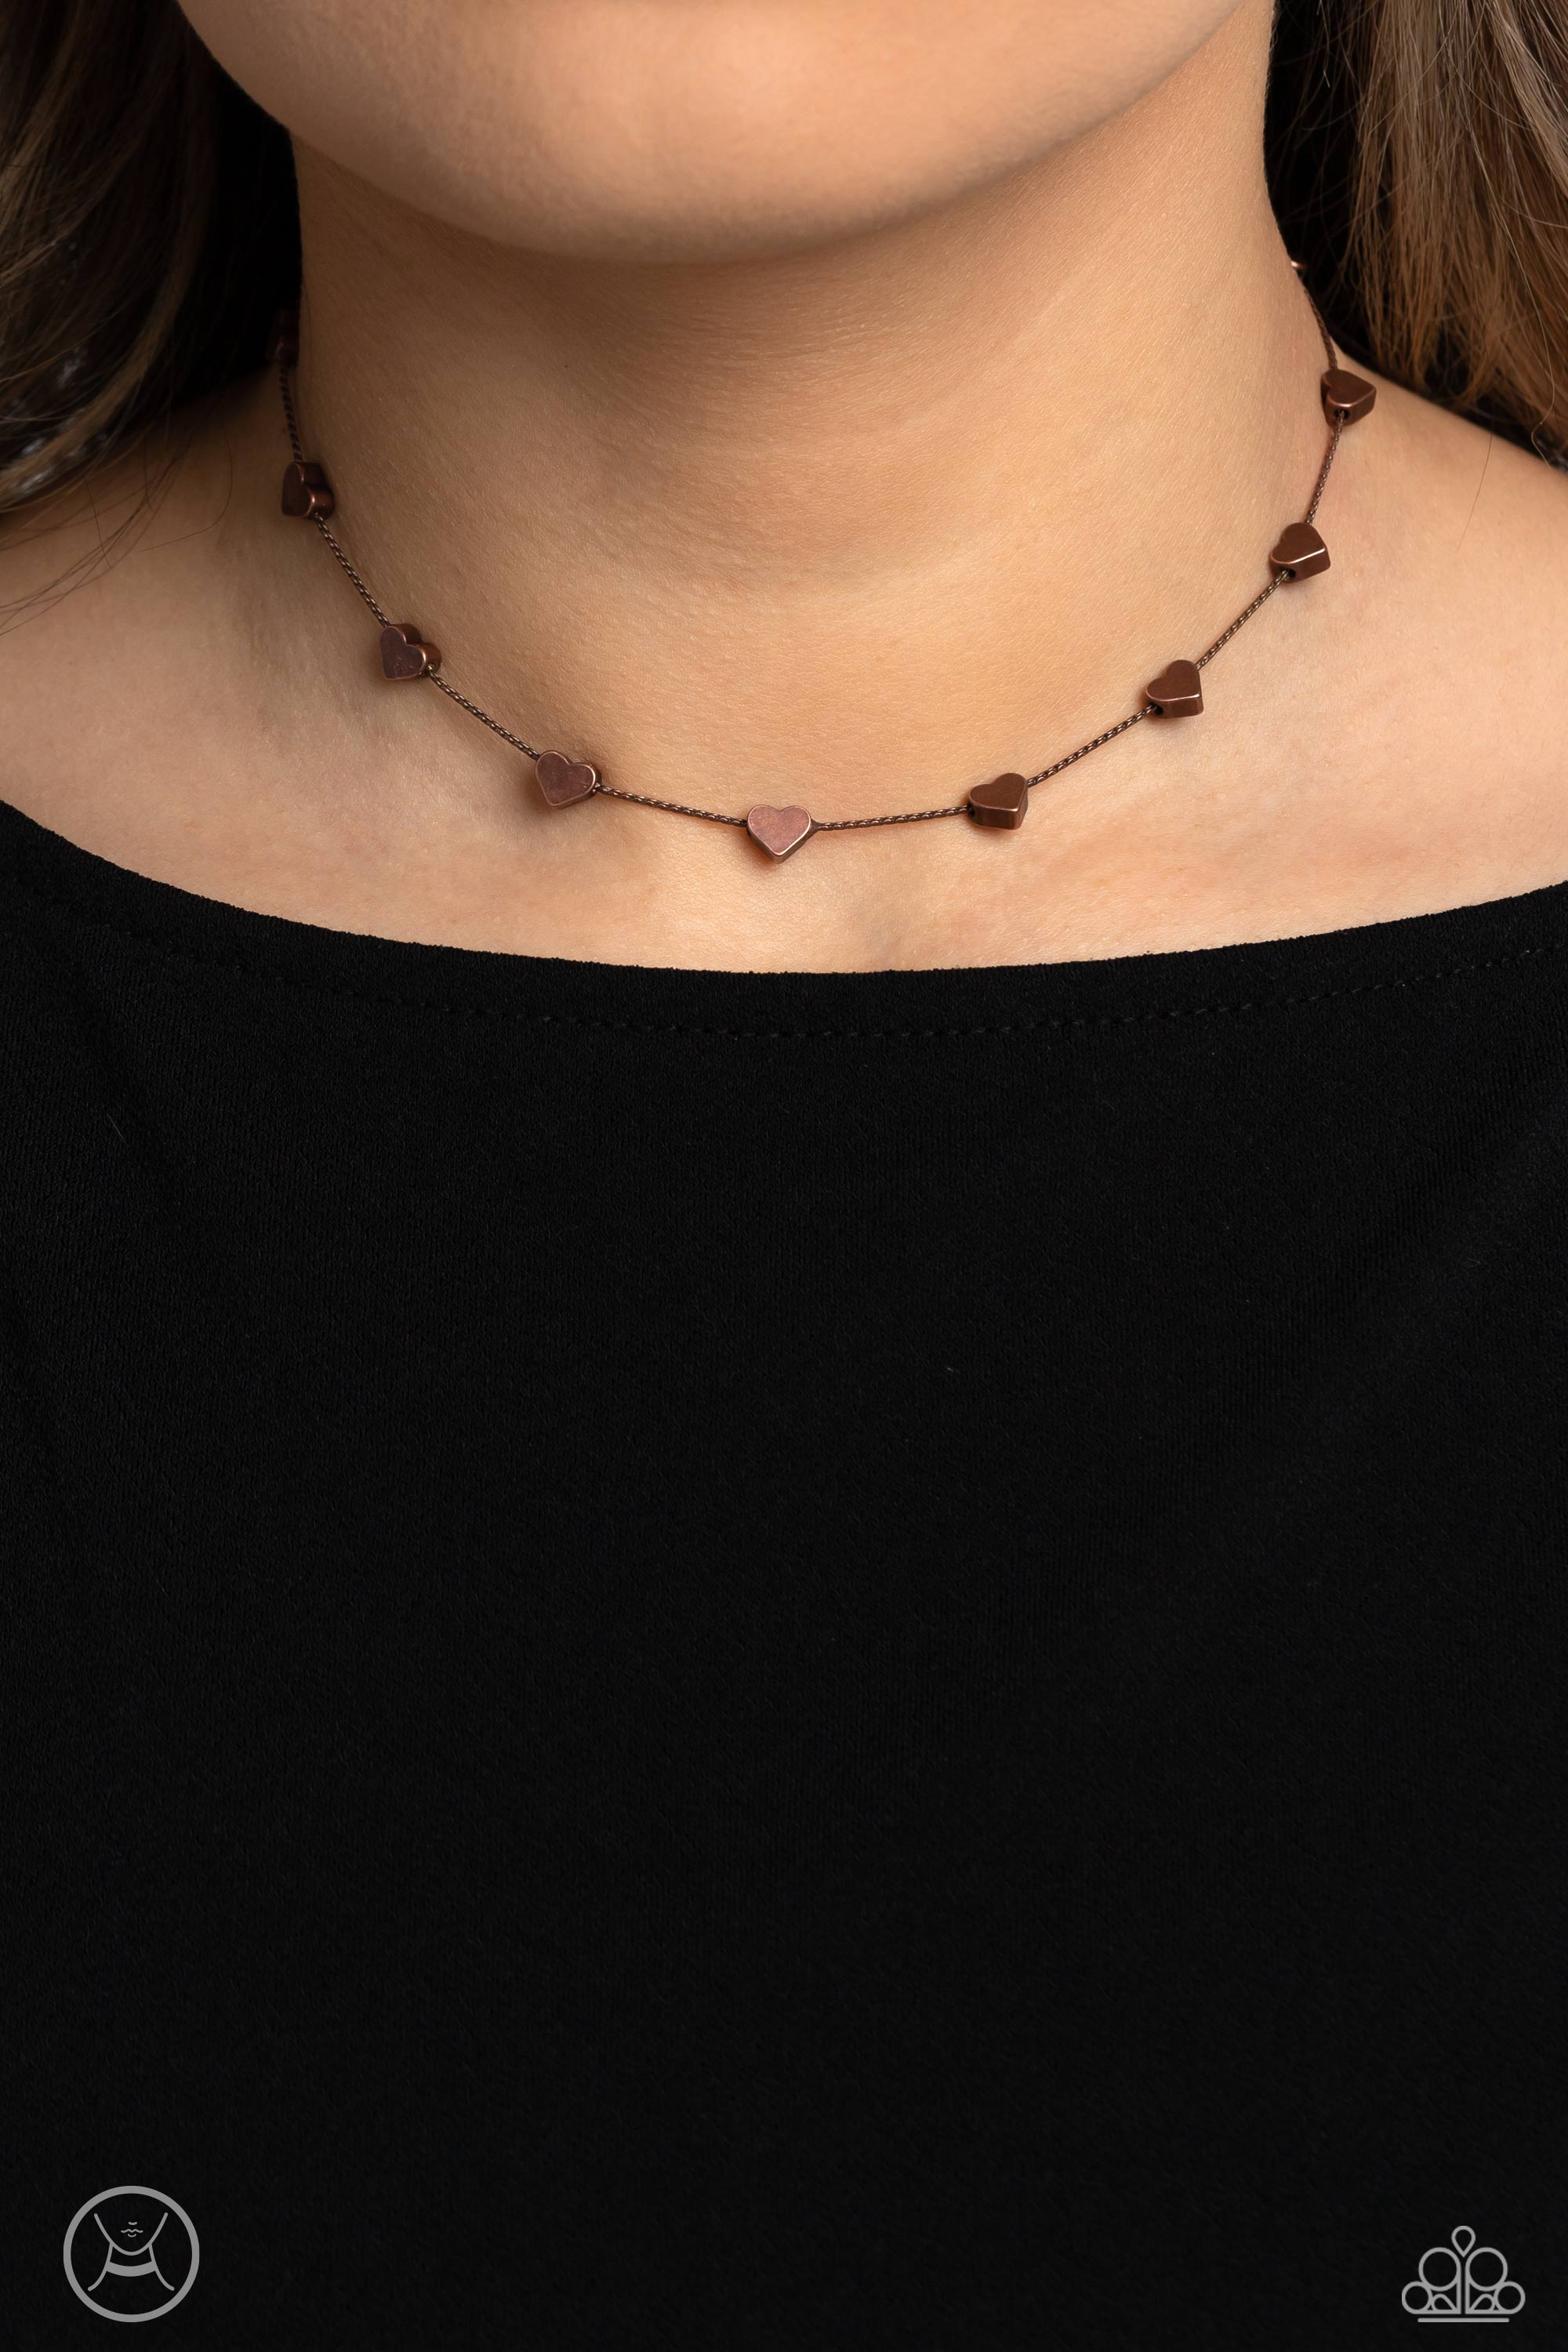 Public Display of Affection Copper Heart Choker Necklace - Paparazzi Accessories- lightbox - CarasShop.com - $5 Jewelry by Cara Jewels